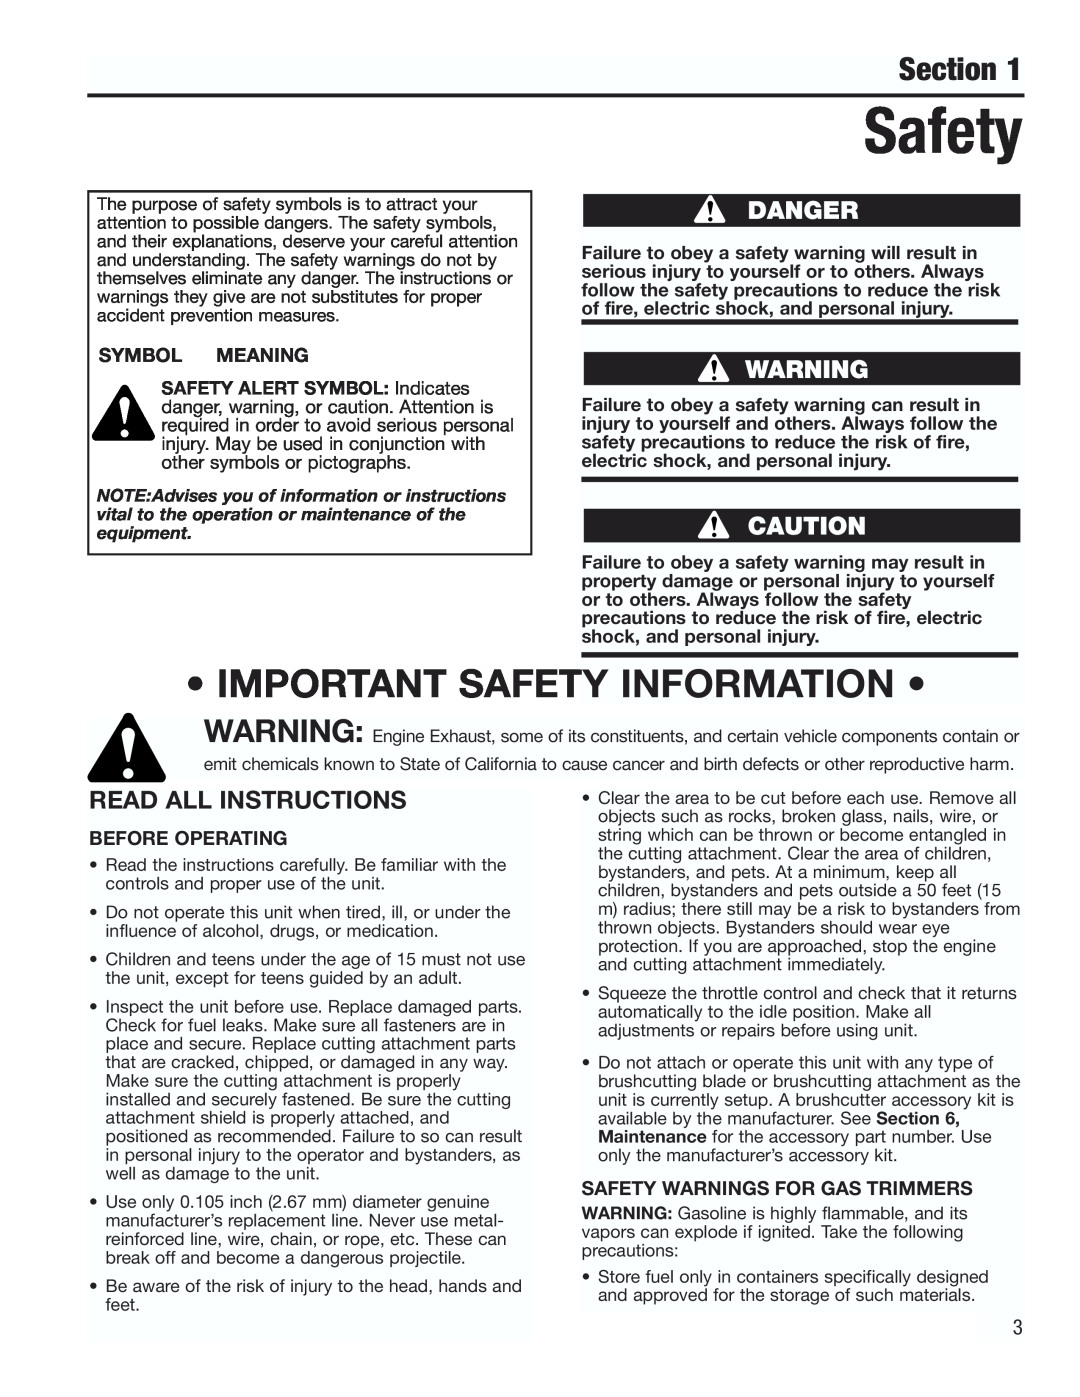 Cub Cadet CC3000 manual Section, Read All Instructions, • Important Safety Information • 